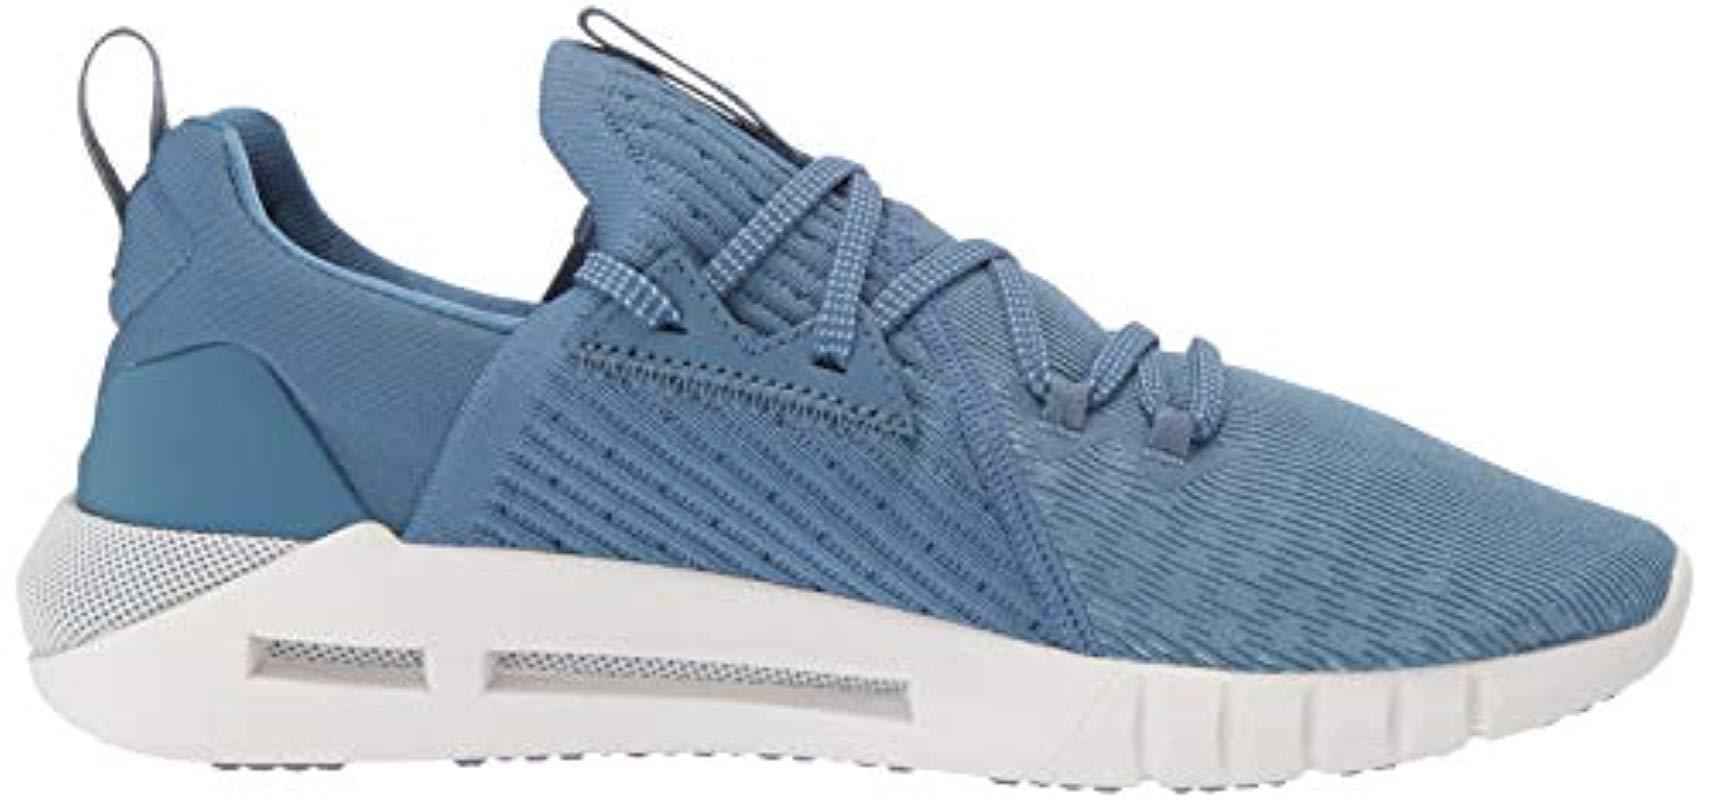 Under Armour Rubber Hovr Slk Evo in Blue - Save 62% | Lyst